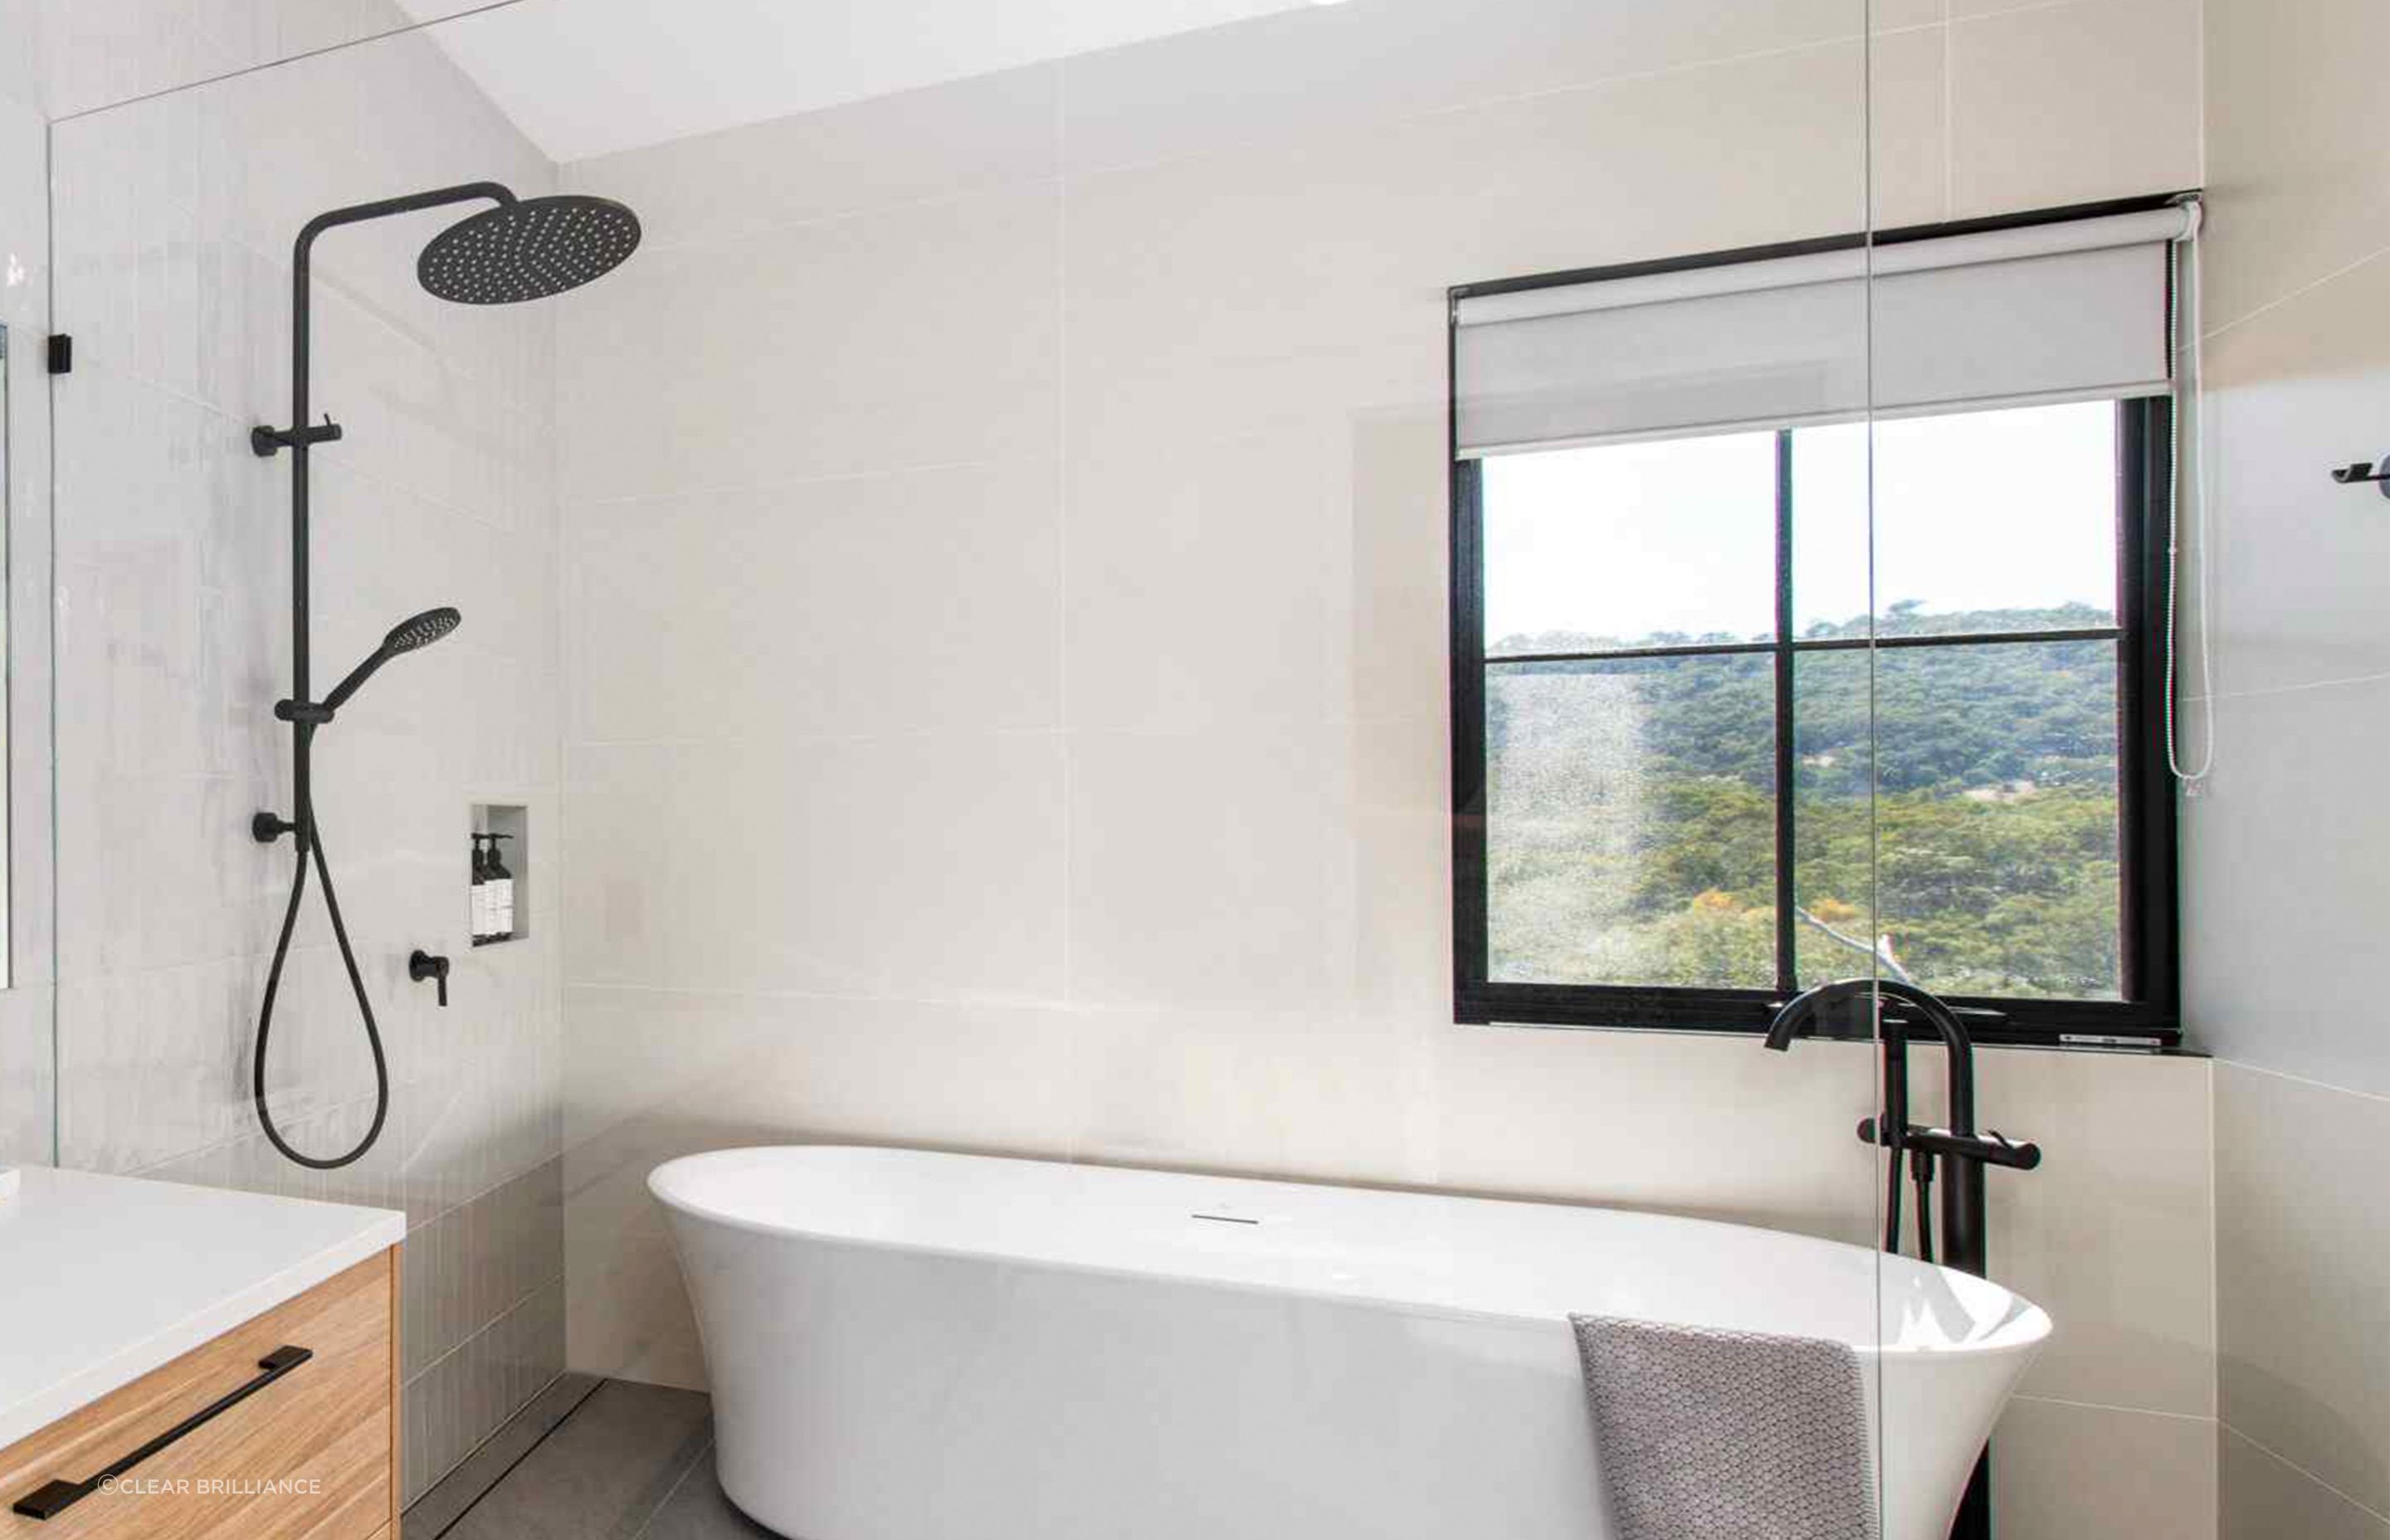 Featured product: Frameless Glass Shower Screens Melbourne.